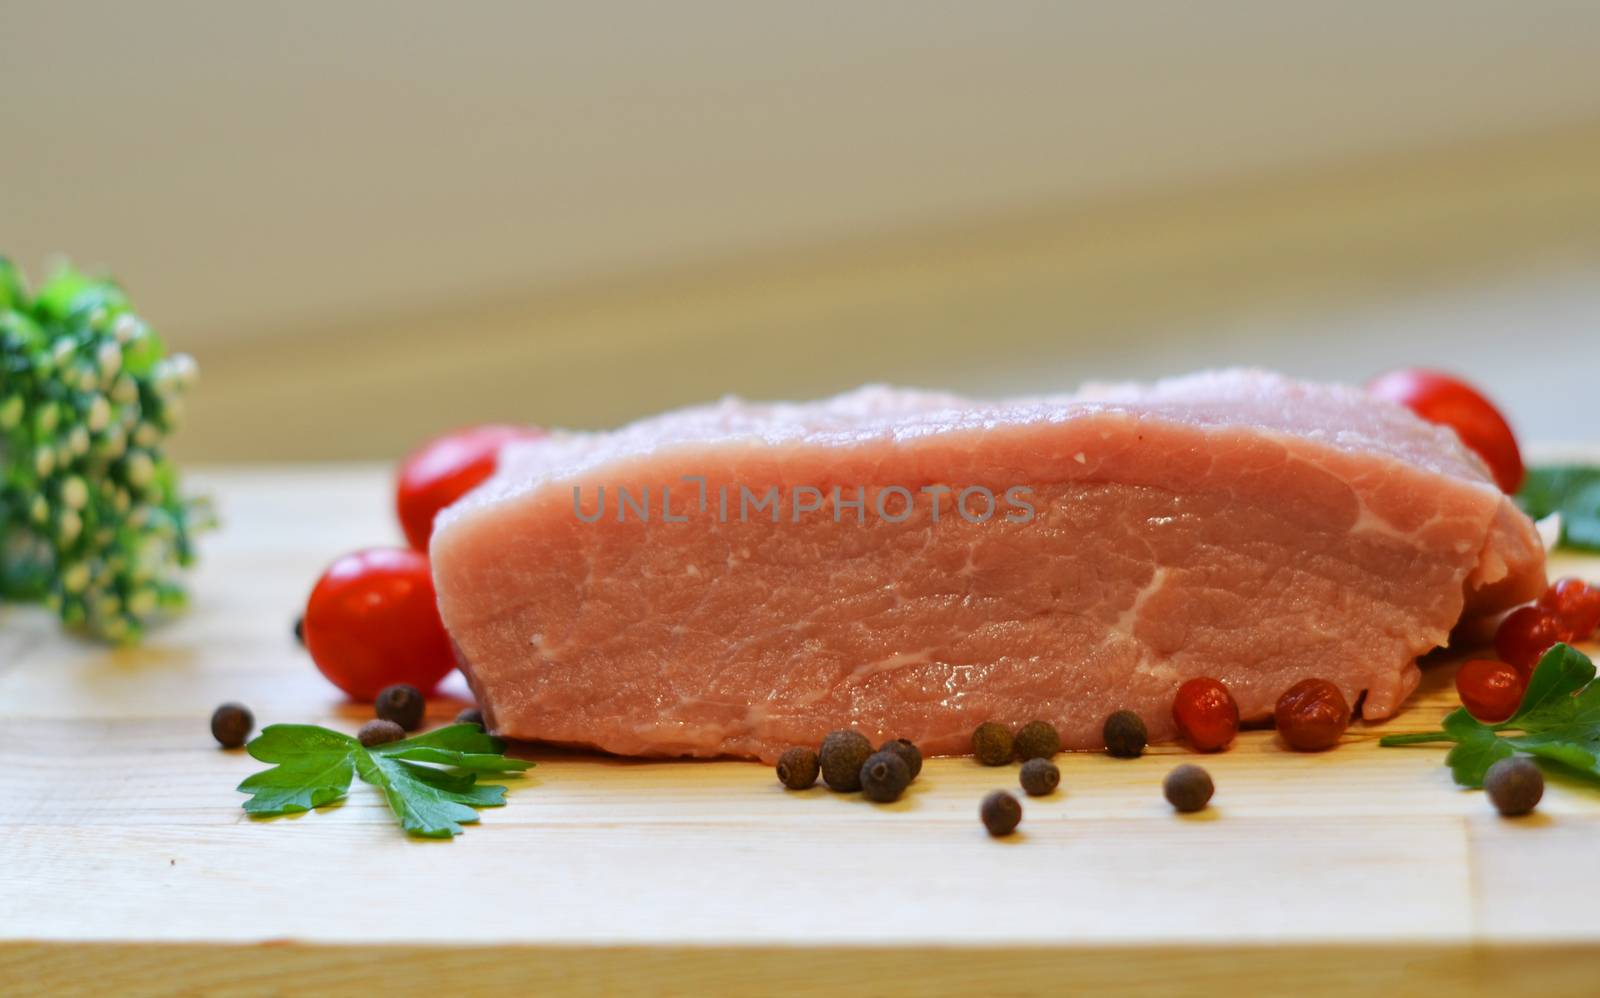 Raw pork meat on cutting board and vegetables and greens.